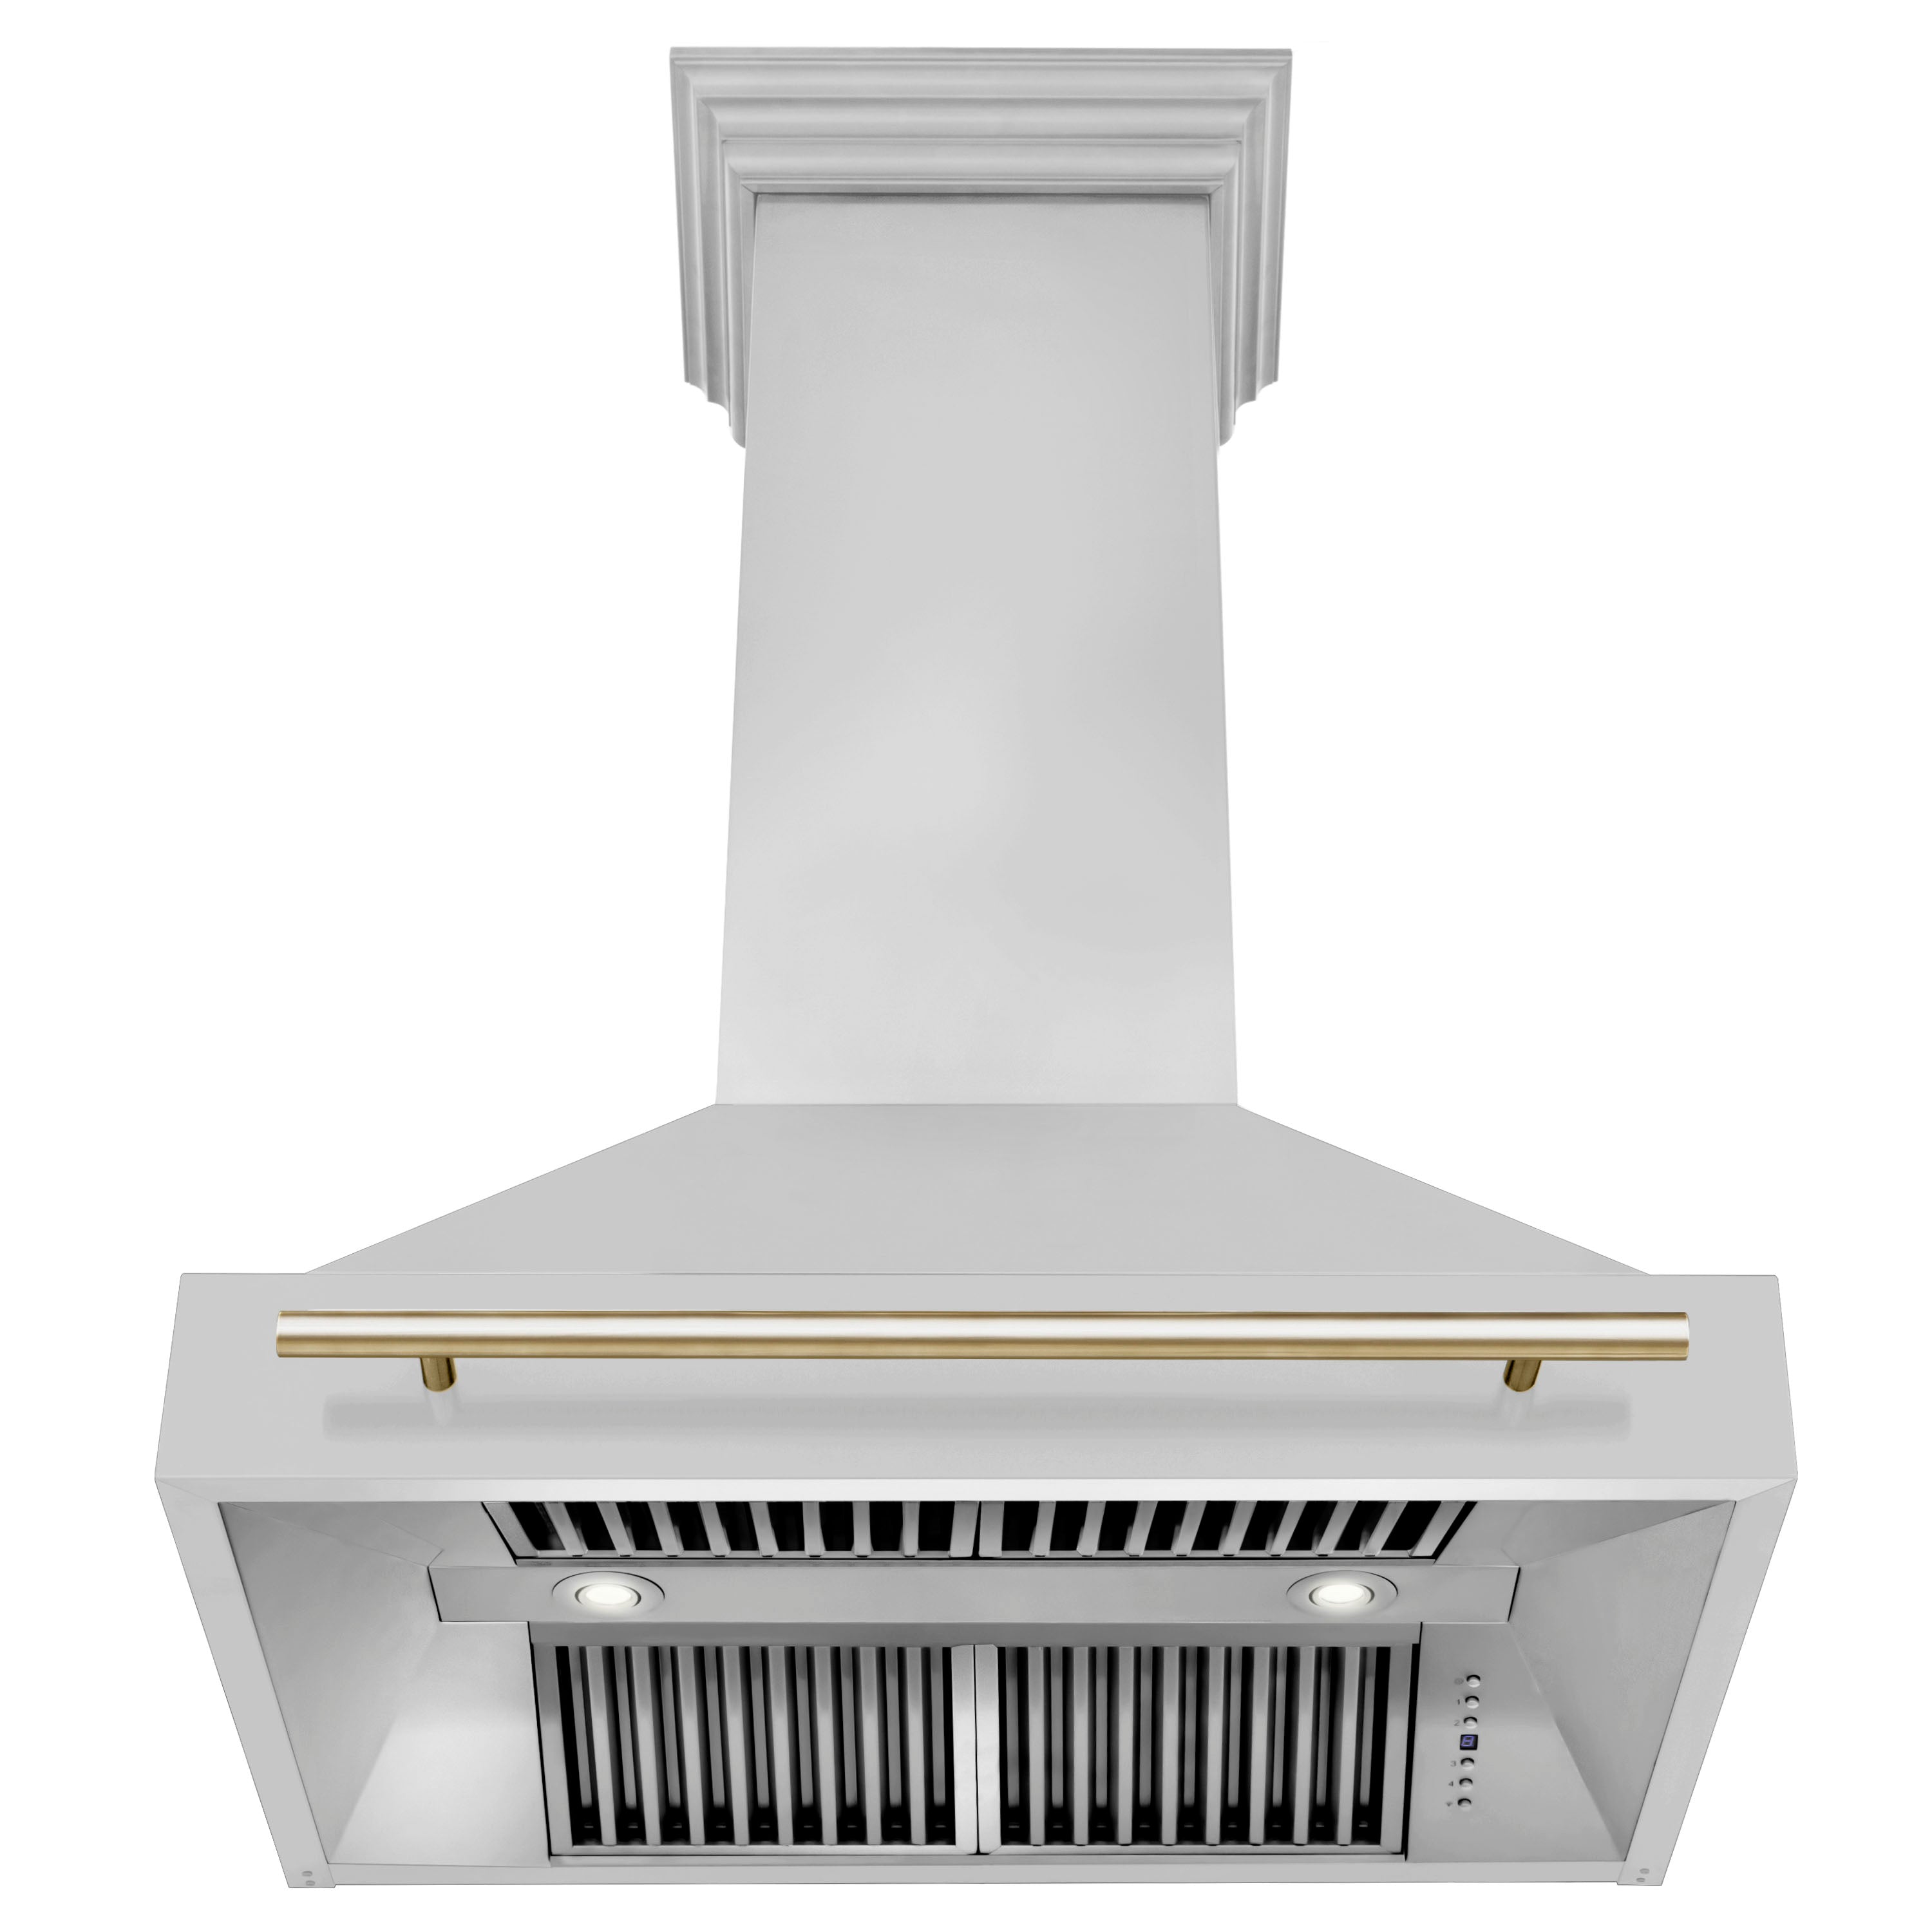 ZLINE 36" Autograph Edition Stainless Steel Range Hood with Stainless Steel Shell and Gold Handle (8654STZ-36-G)